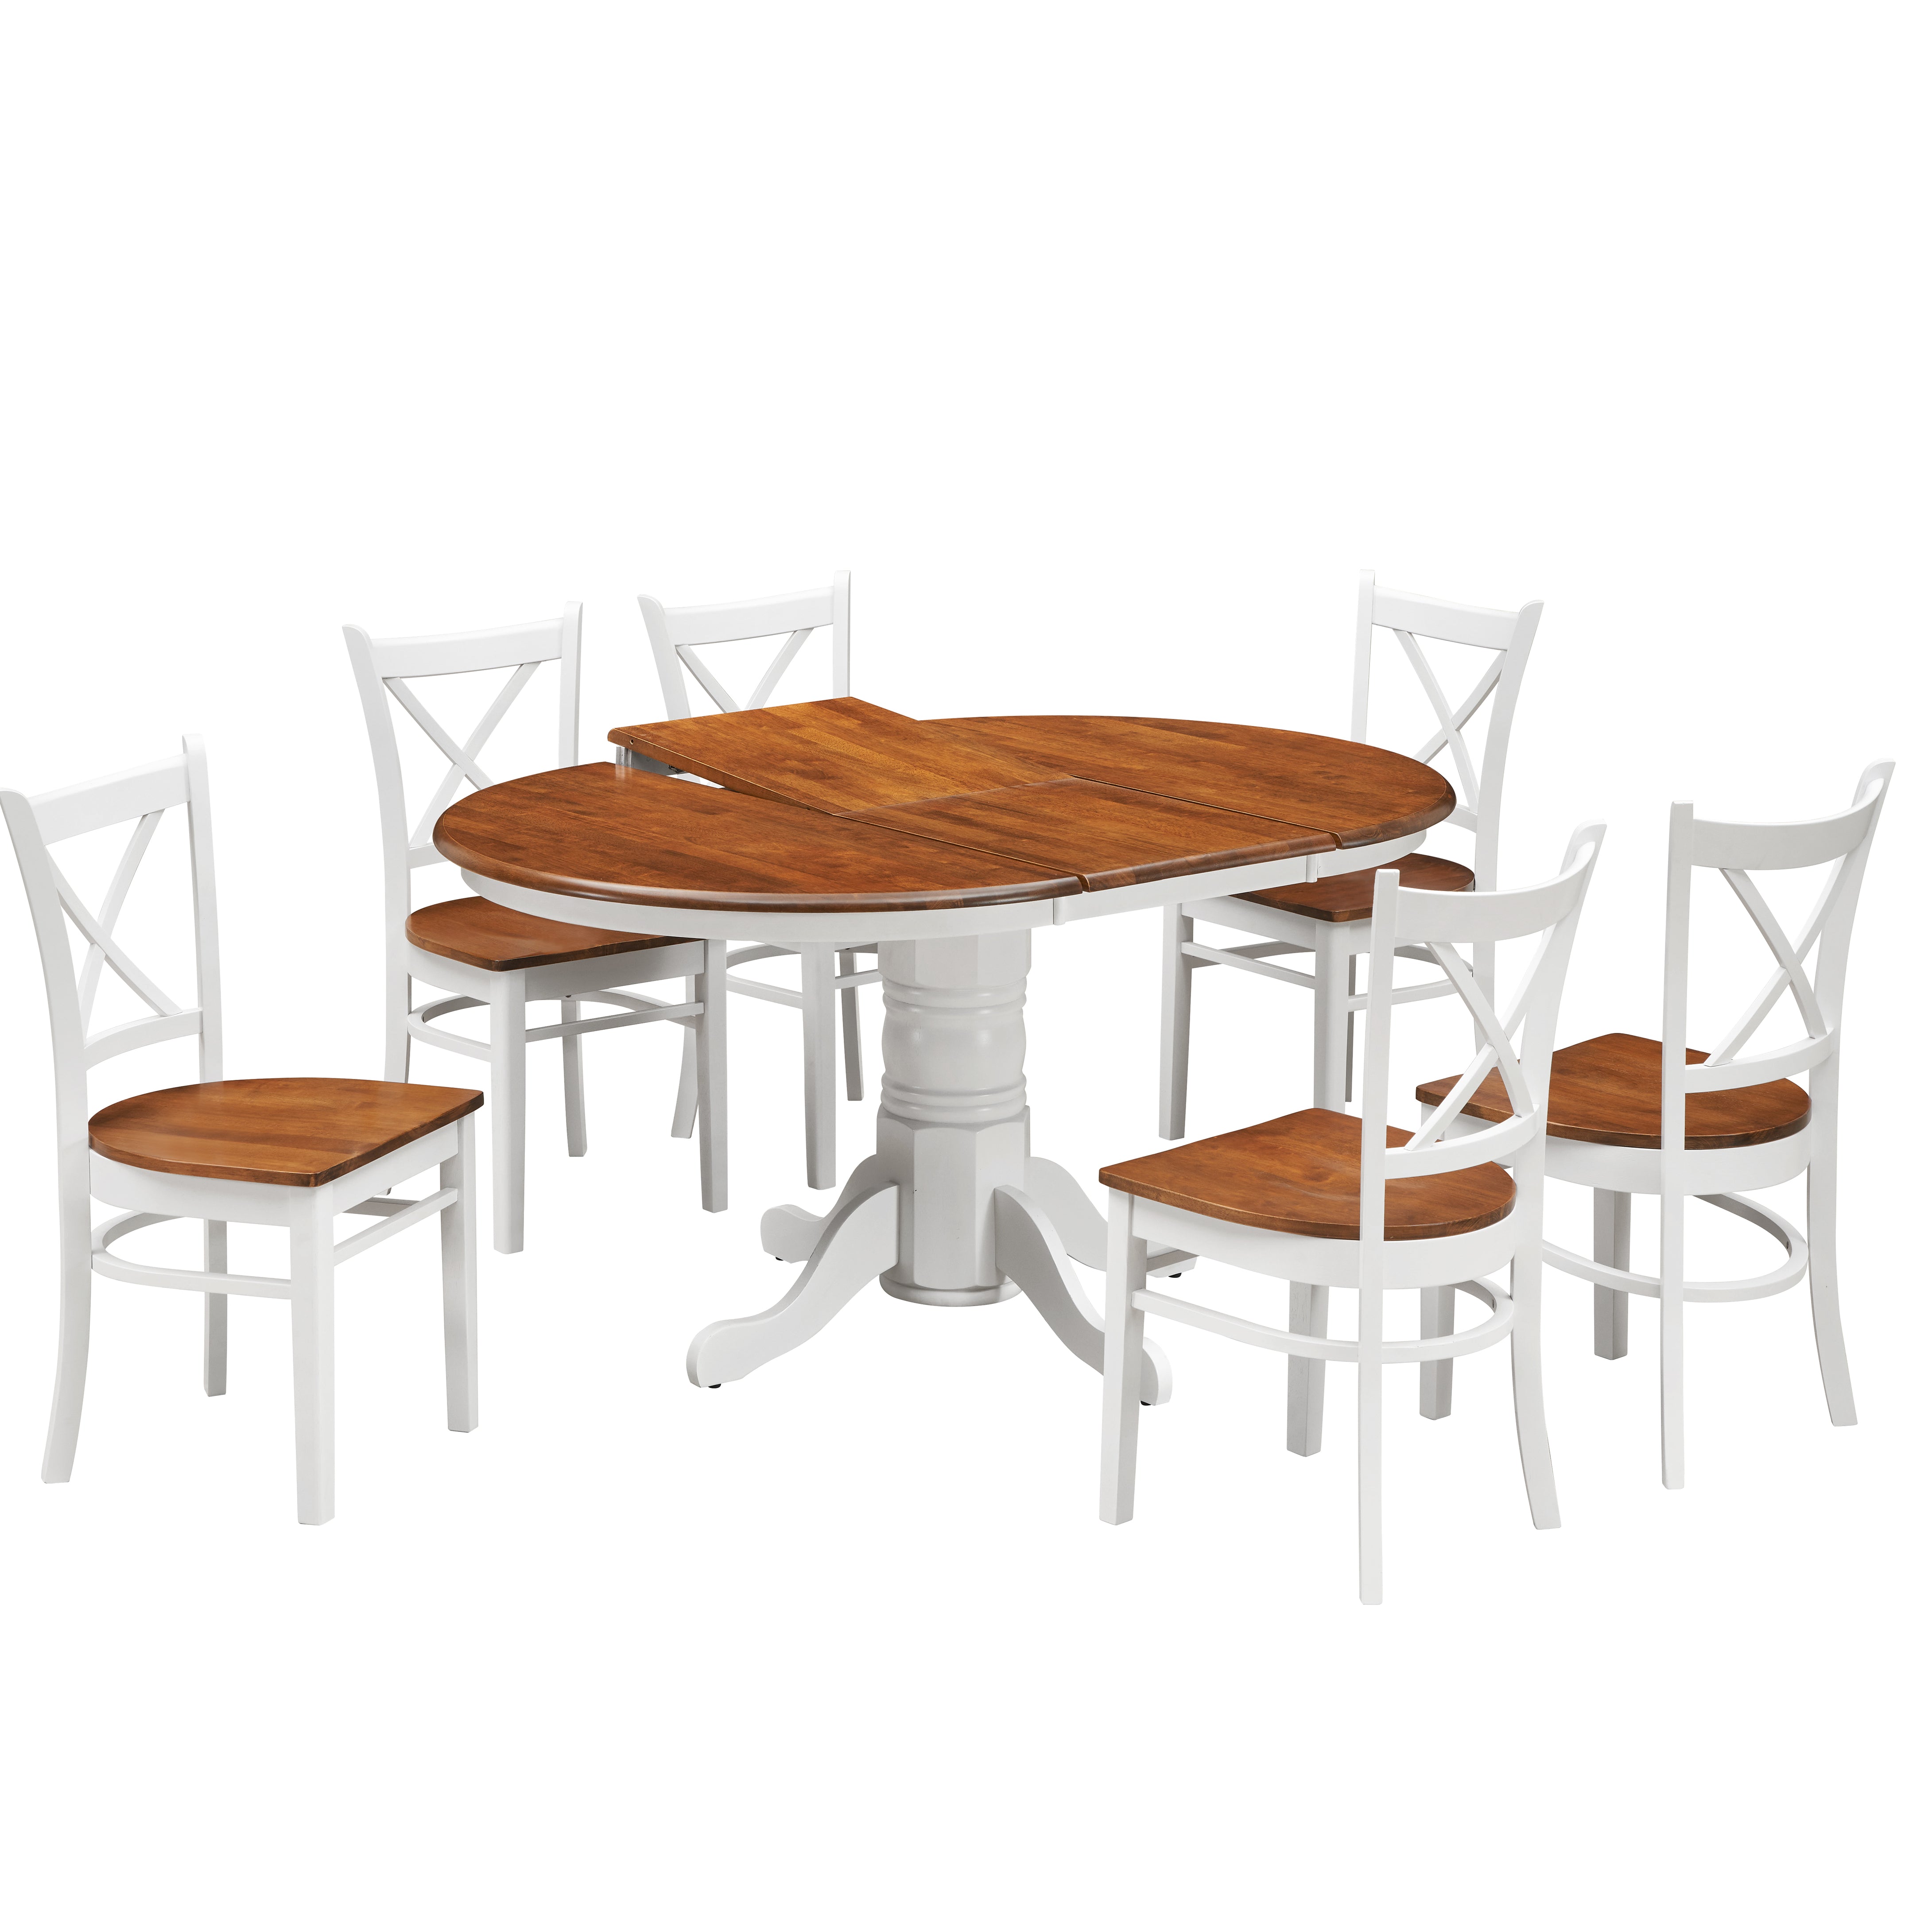 Lupin 7pc Dining Set 150cm Extendable Pedestral Table 4 Timber Chair - White Oak - SILBERSHELL